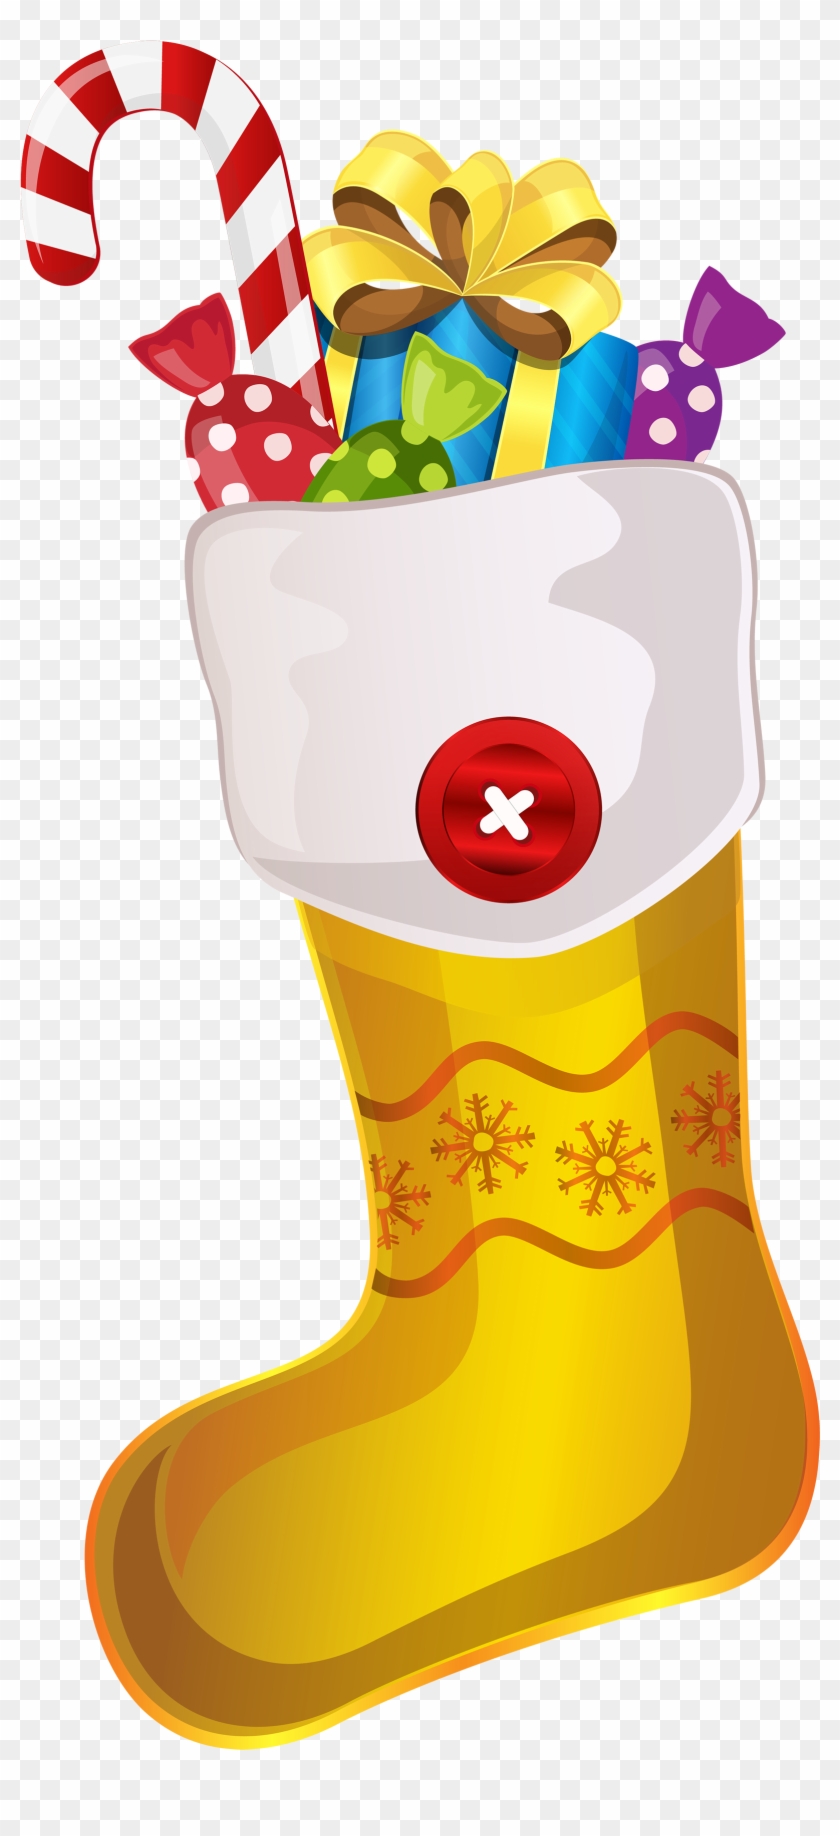 Christmas Yellow Stocking With Candy Cane Png Clipart - Clip Art #547952